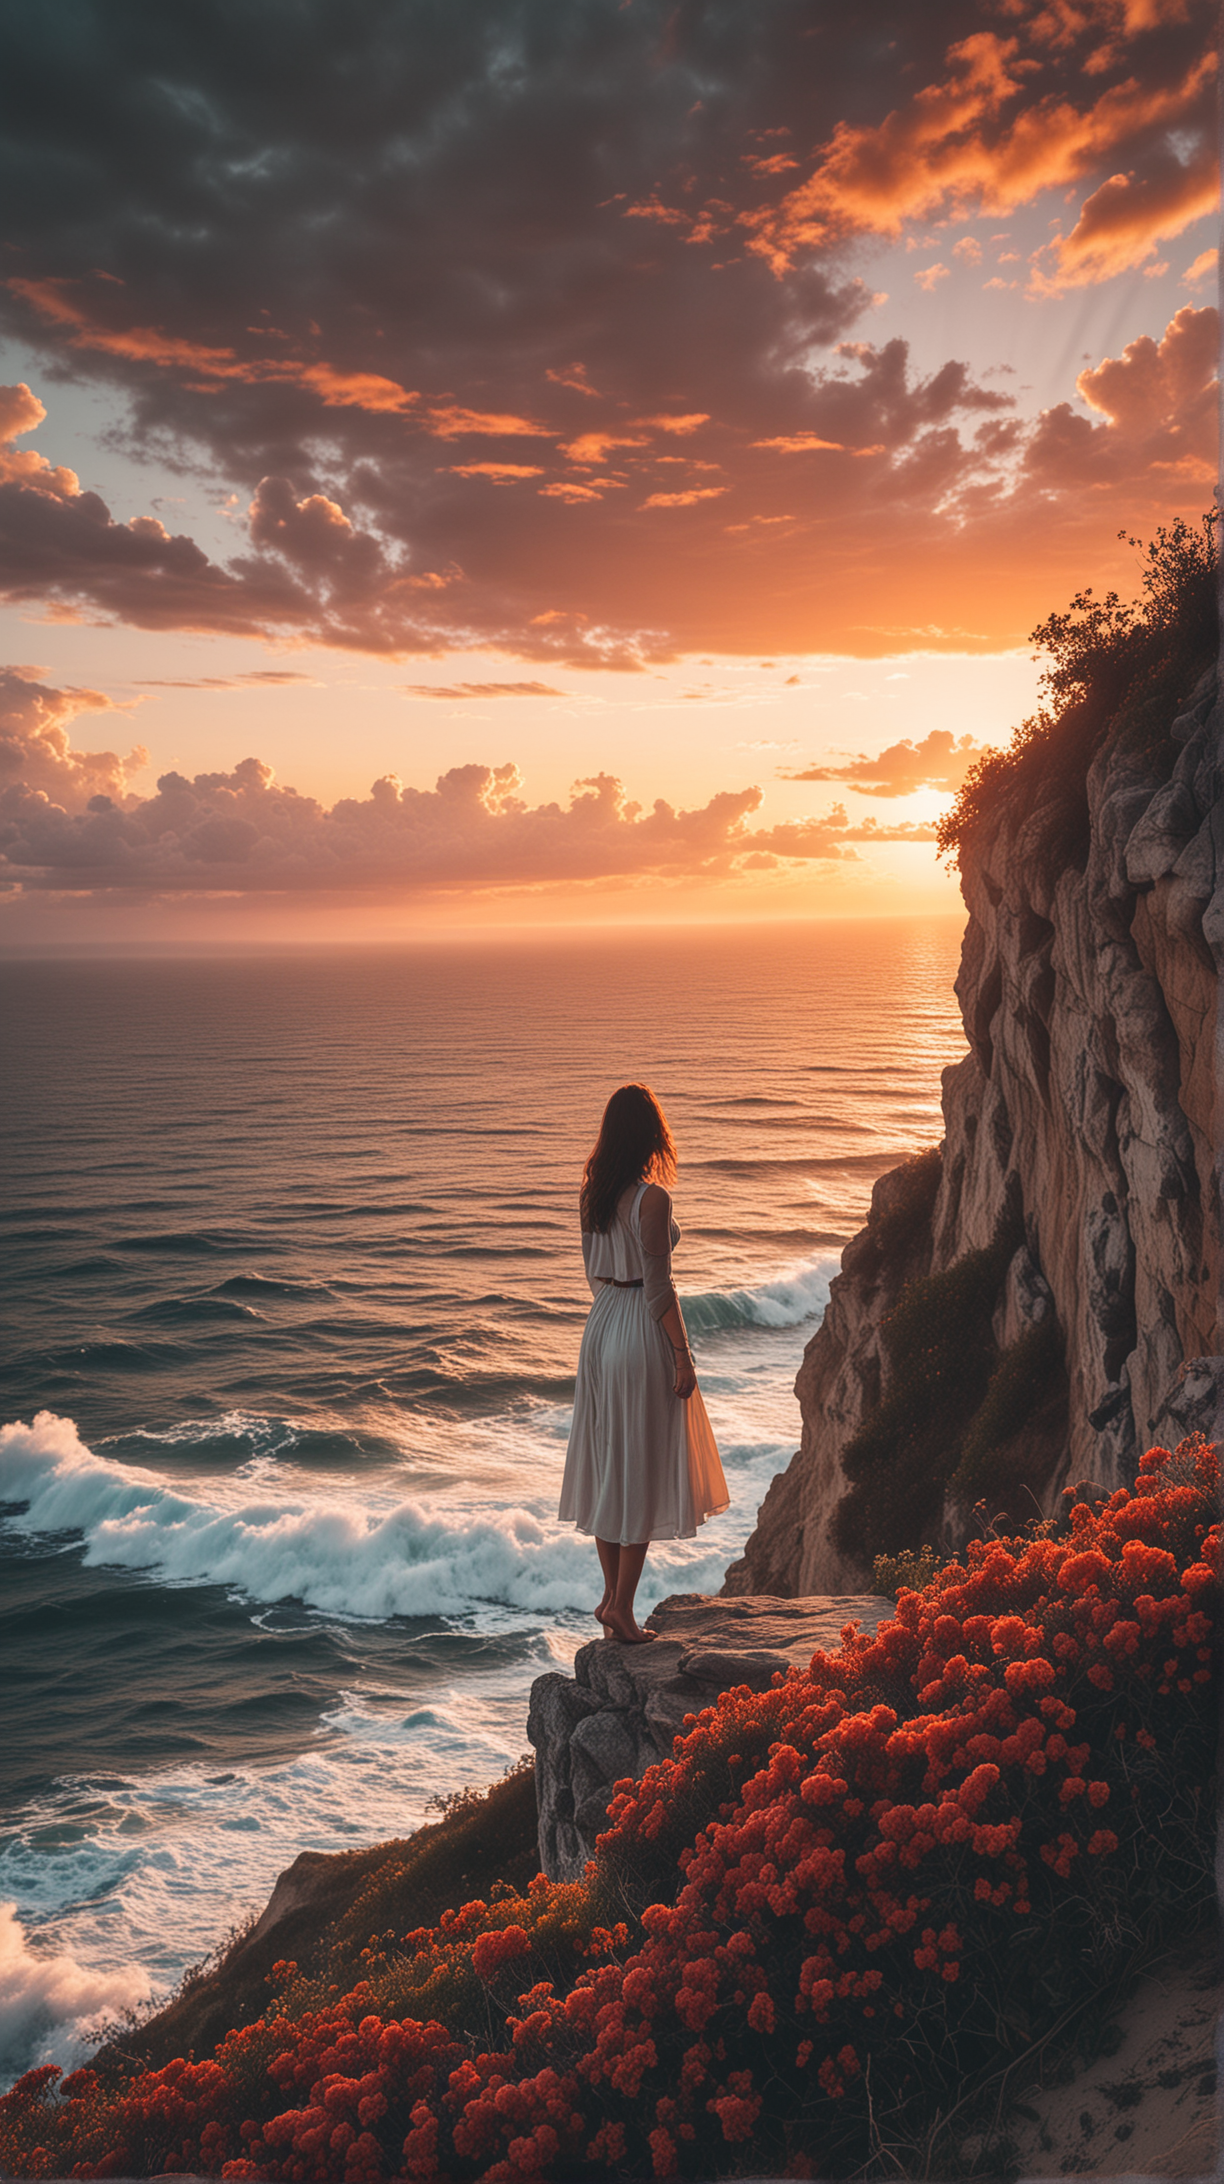 cinematic tone.
A candid photograph of a woman standing at the edge of a cliff overlooking the ocean in a Codex_401 style, beautiful sky and fluffy clouds silver lining, variant vibrant flowers bush, red orange sunset colors,